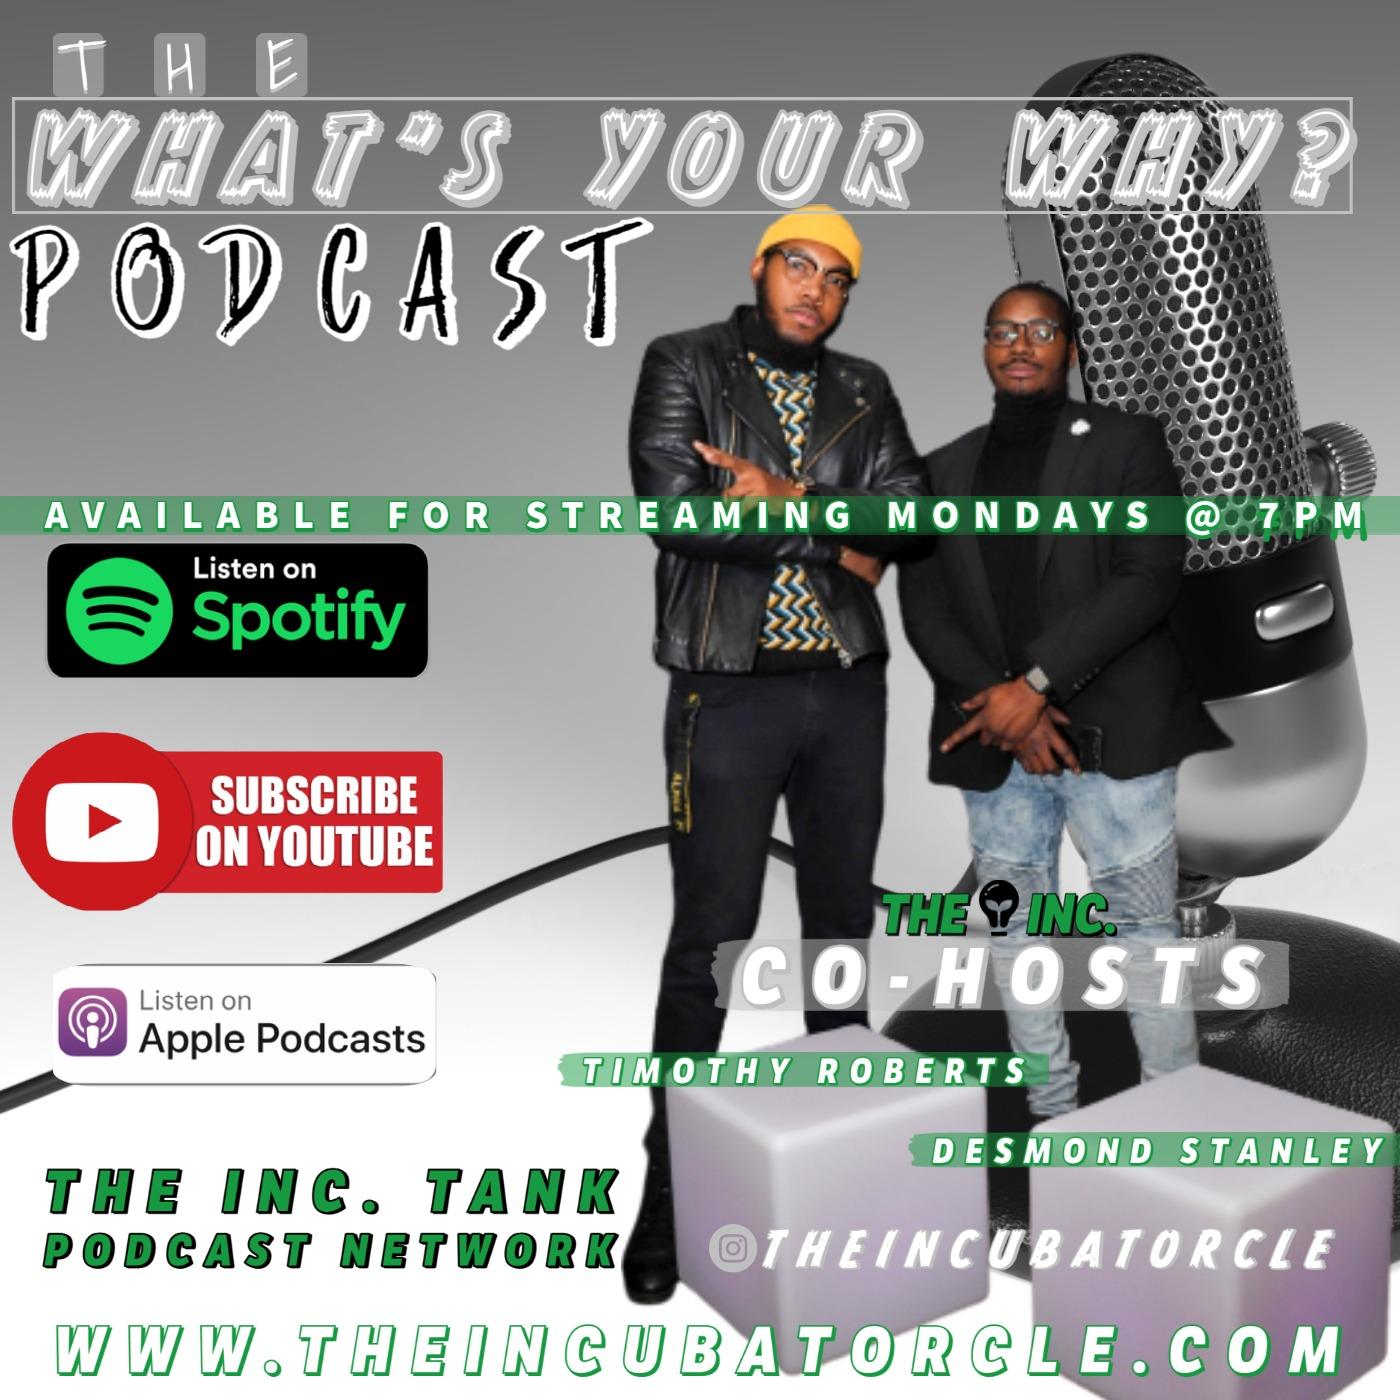 WHAT'S YOUR WHY PODCAST